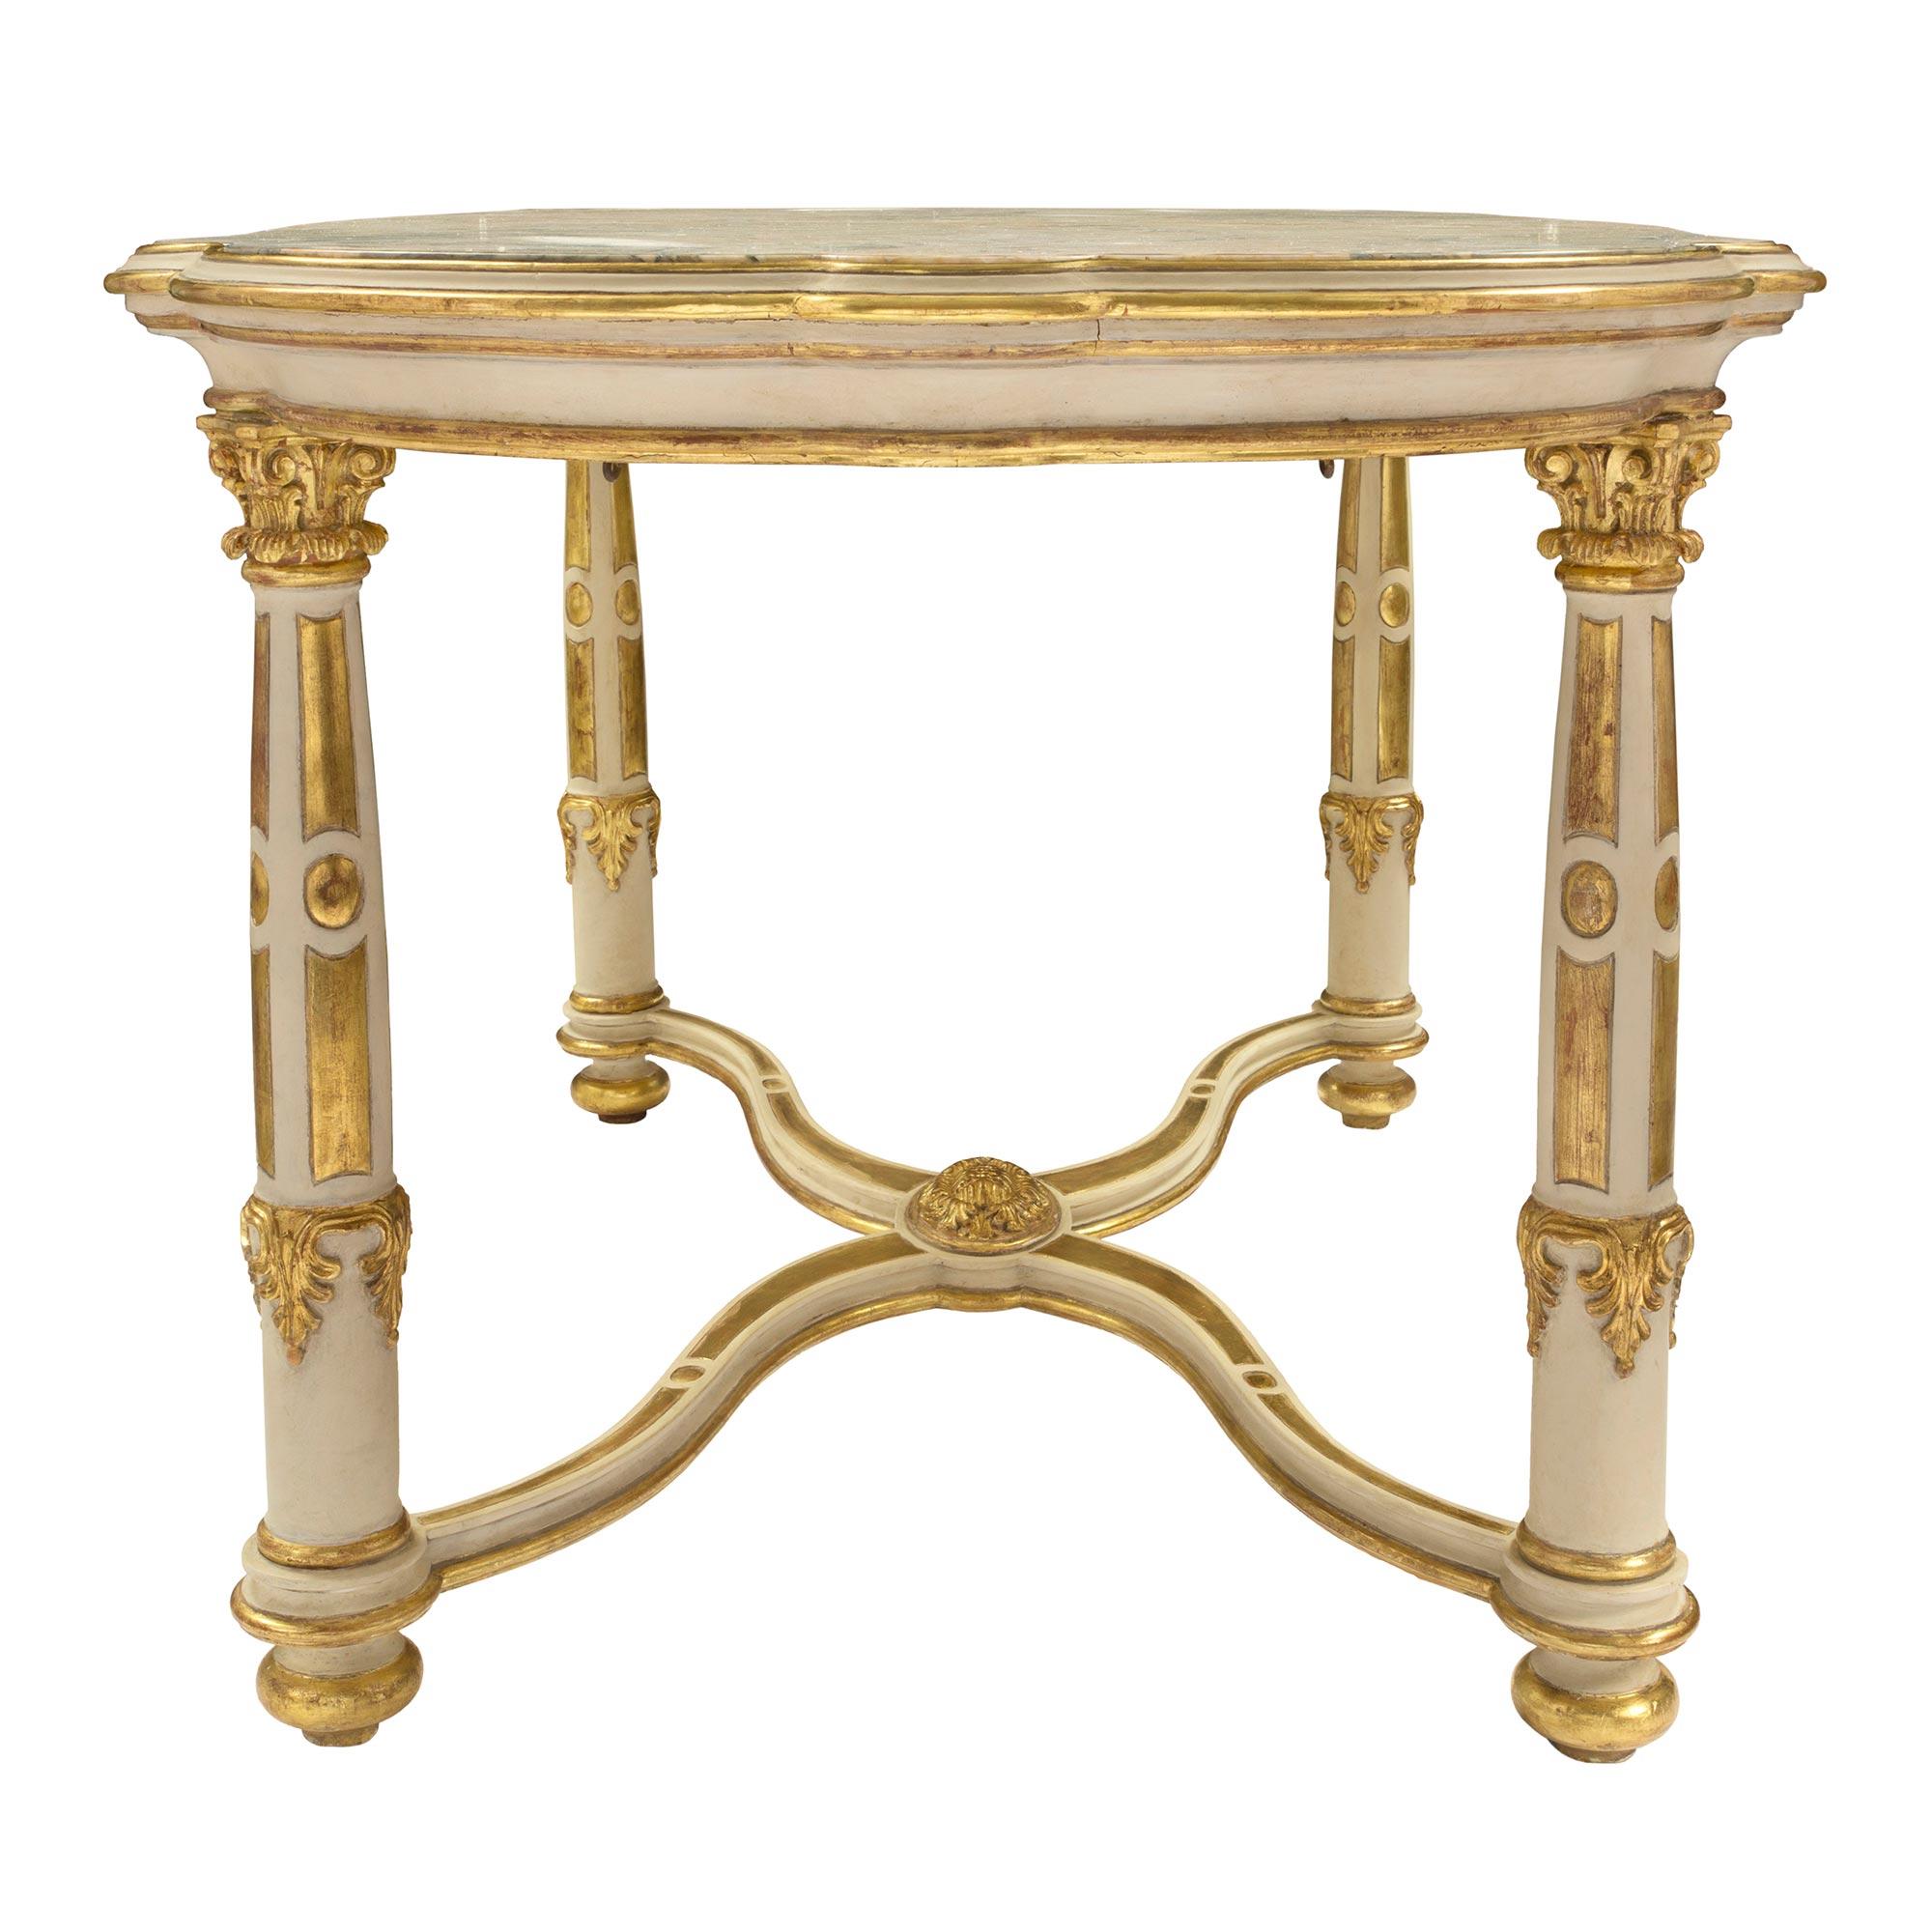 Italian 19th Century Louis XVI Style Giltwood and Marble Center Table In Good Condition For Sale In West Palm Beach, FL